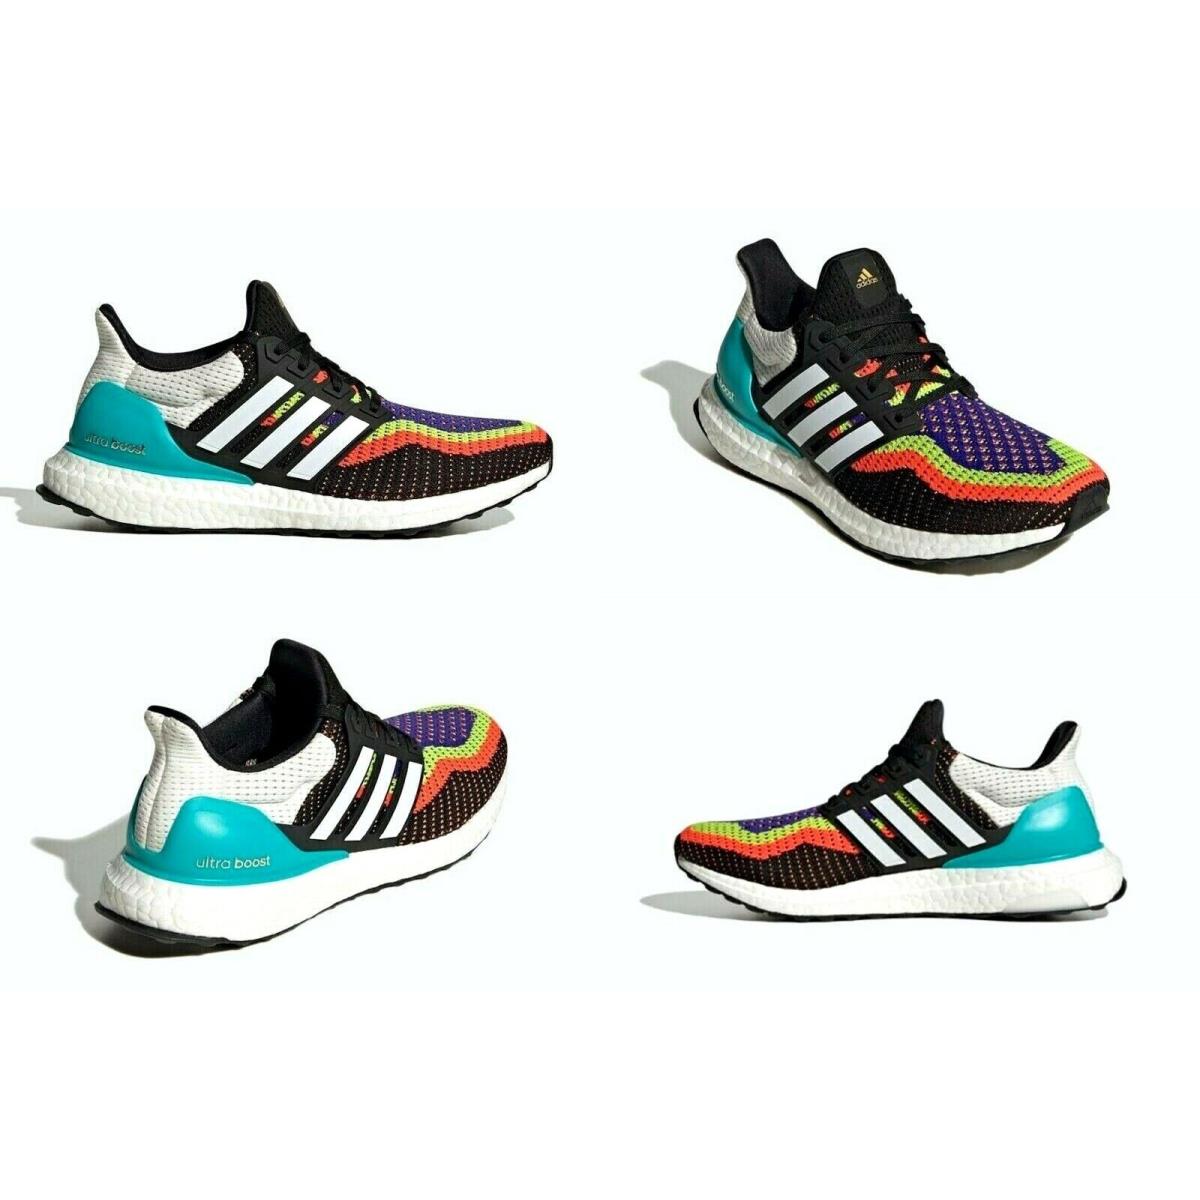 Adidas Ultraboost 2.0 Dna W Multi Color Running Shoes Size 5 US Women FW8709